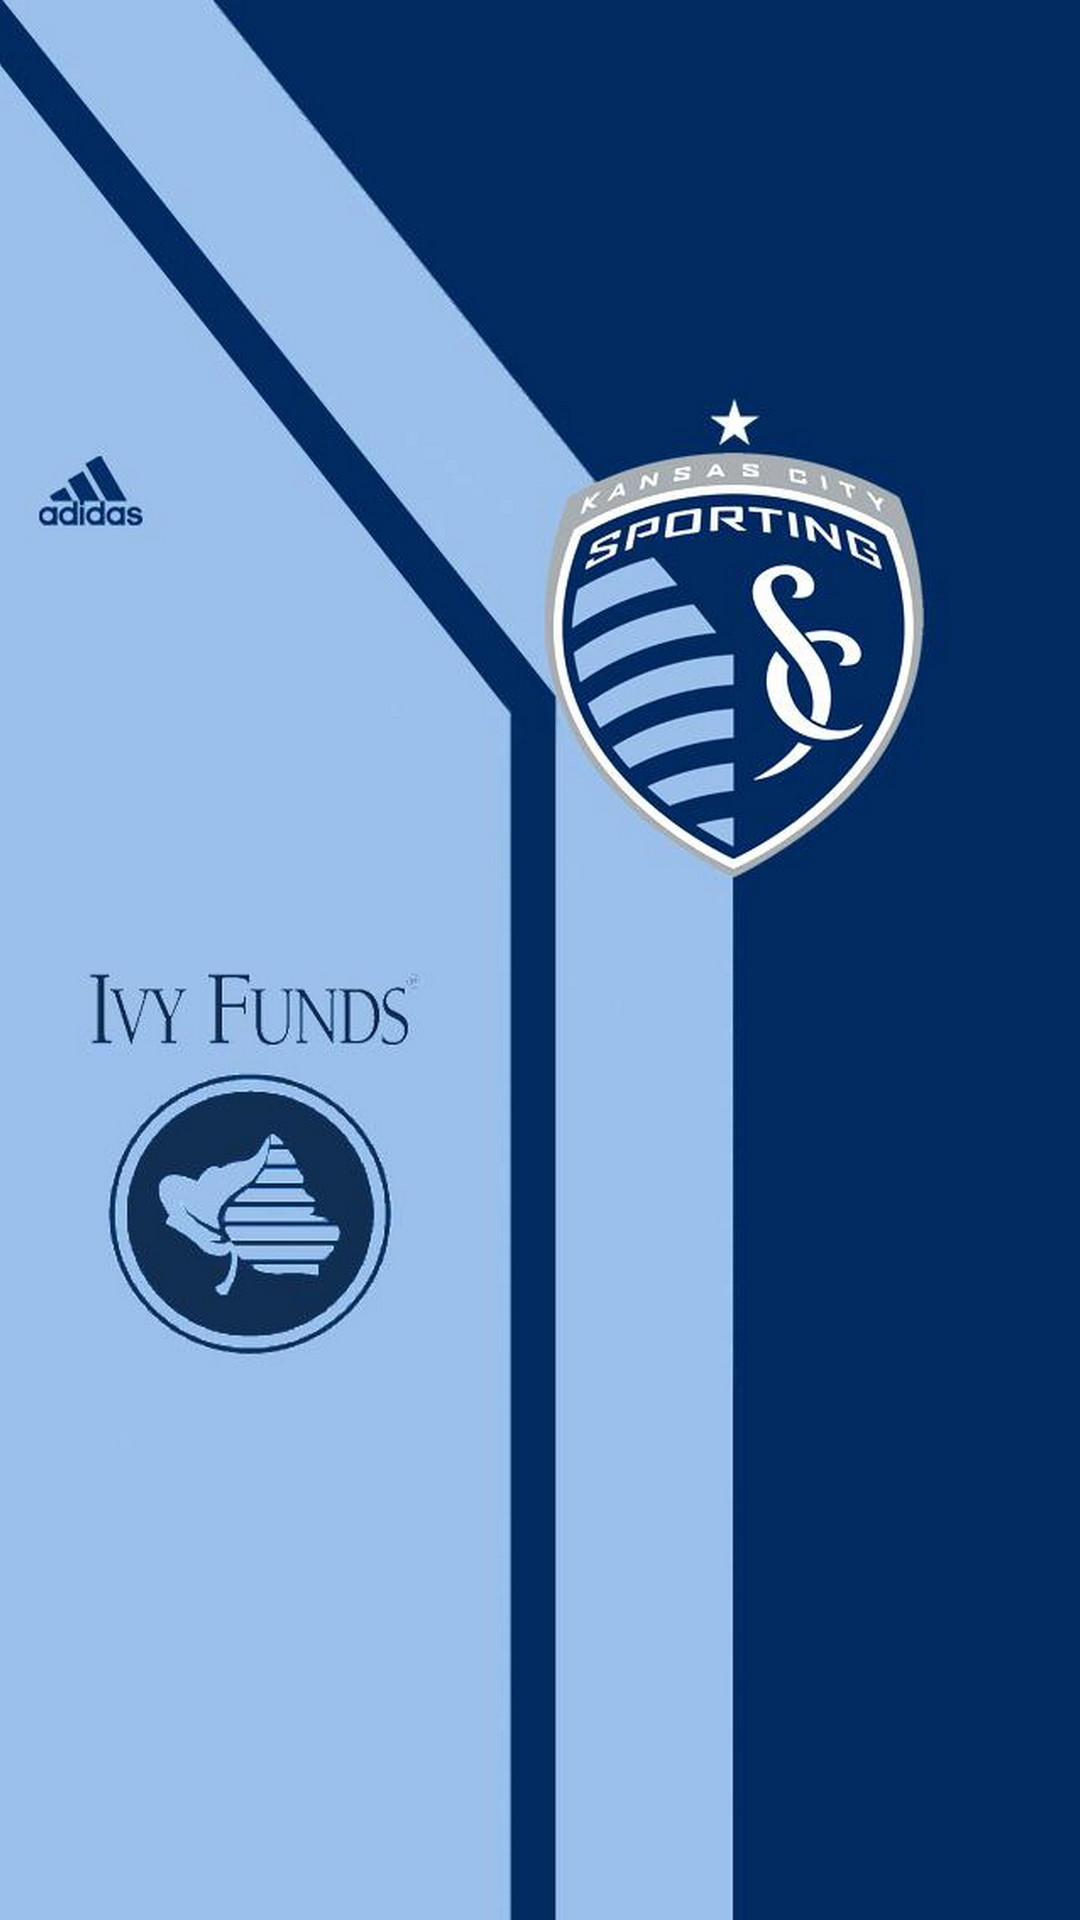 Sporting Kansas City iPhone 7 Plus Wallpaper With high-resolution 1080X1920 pixel. You can use this wallpaper for your Desktop Computers, Mac Screensavers, Windows Backgrounds, iPhone Wallpapers, Tablet or Android Lock screen and another Mobile device